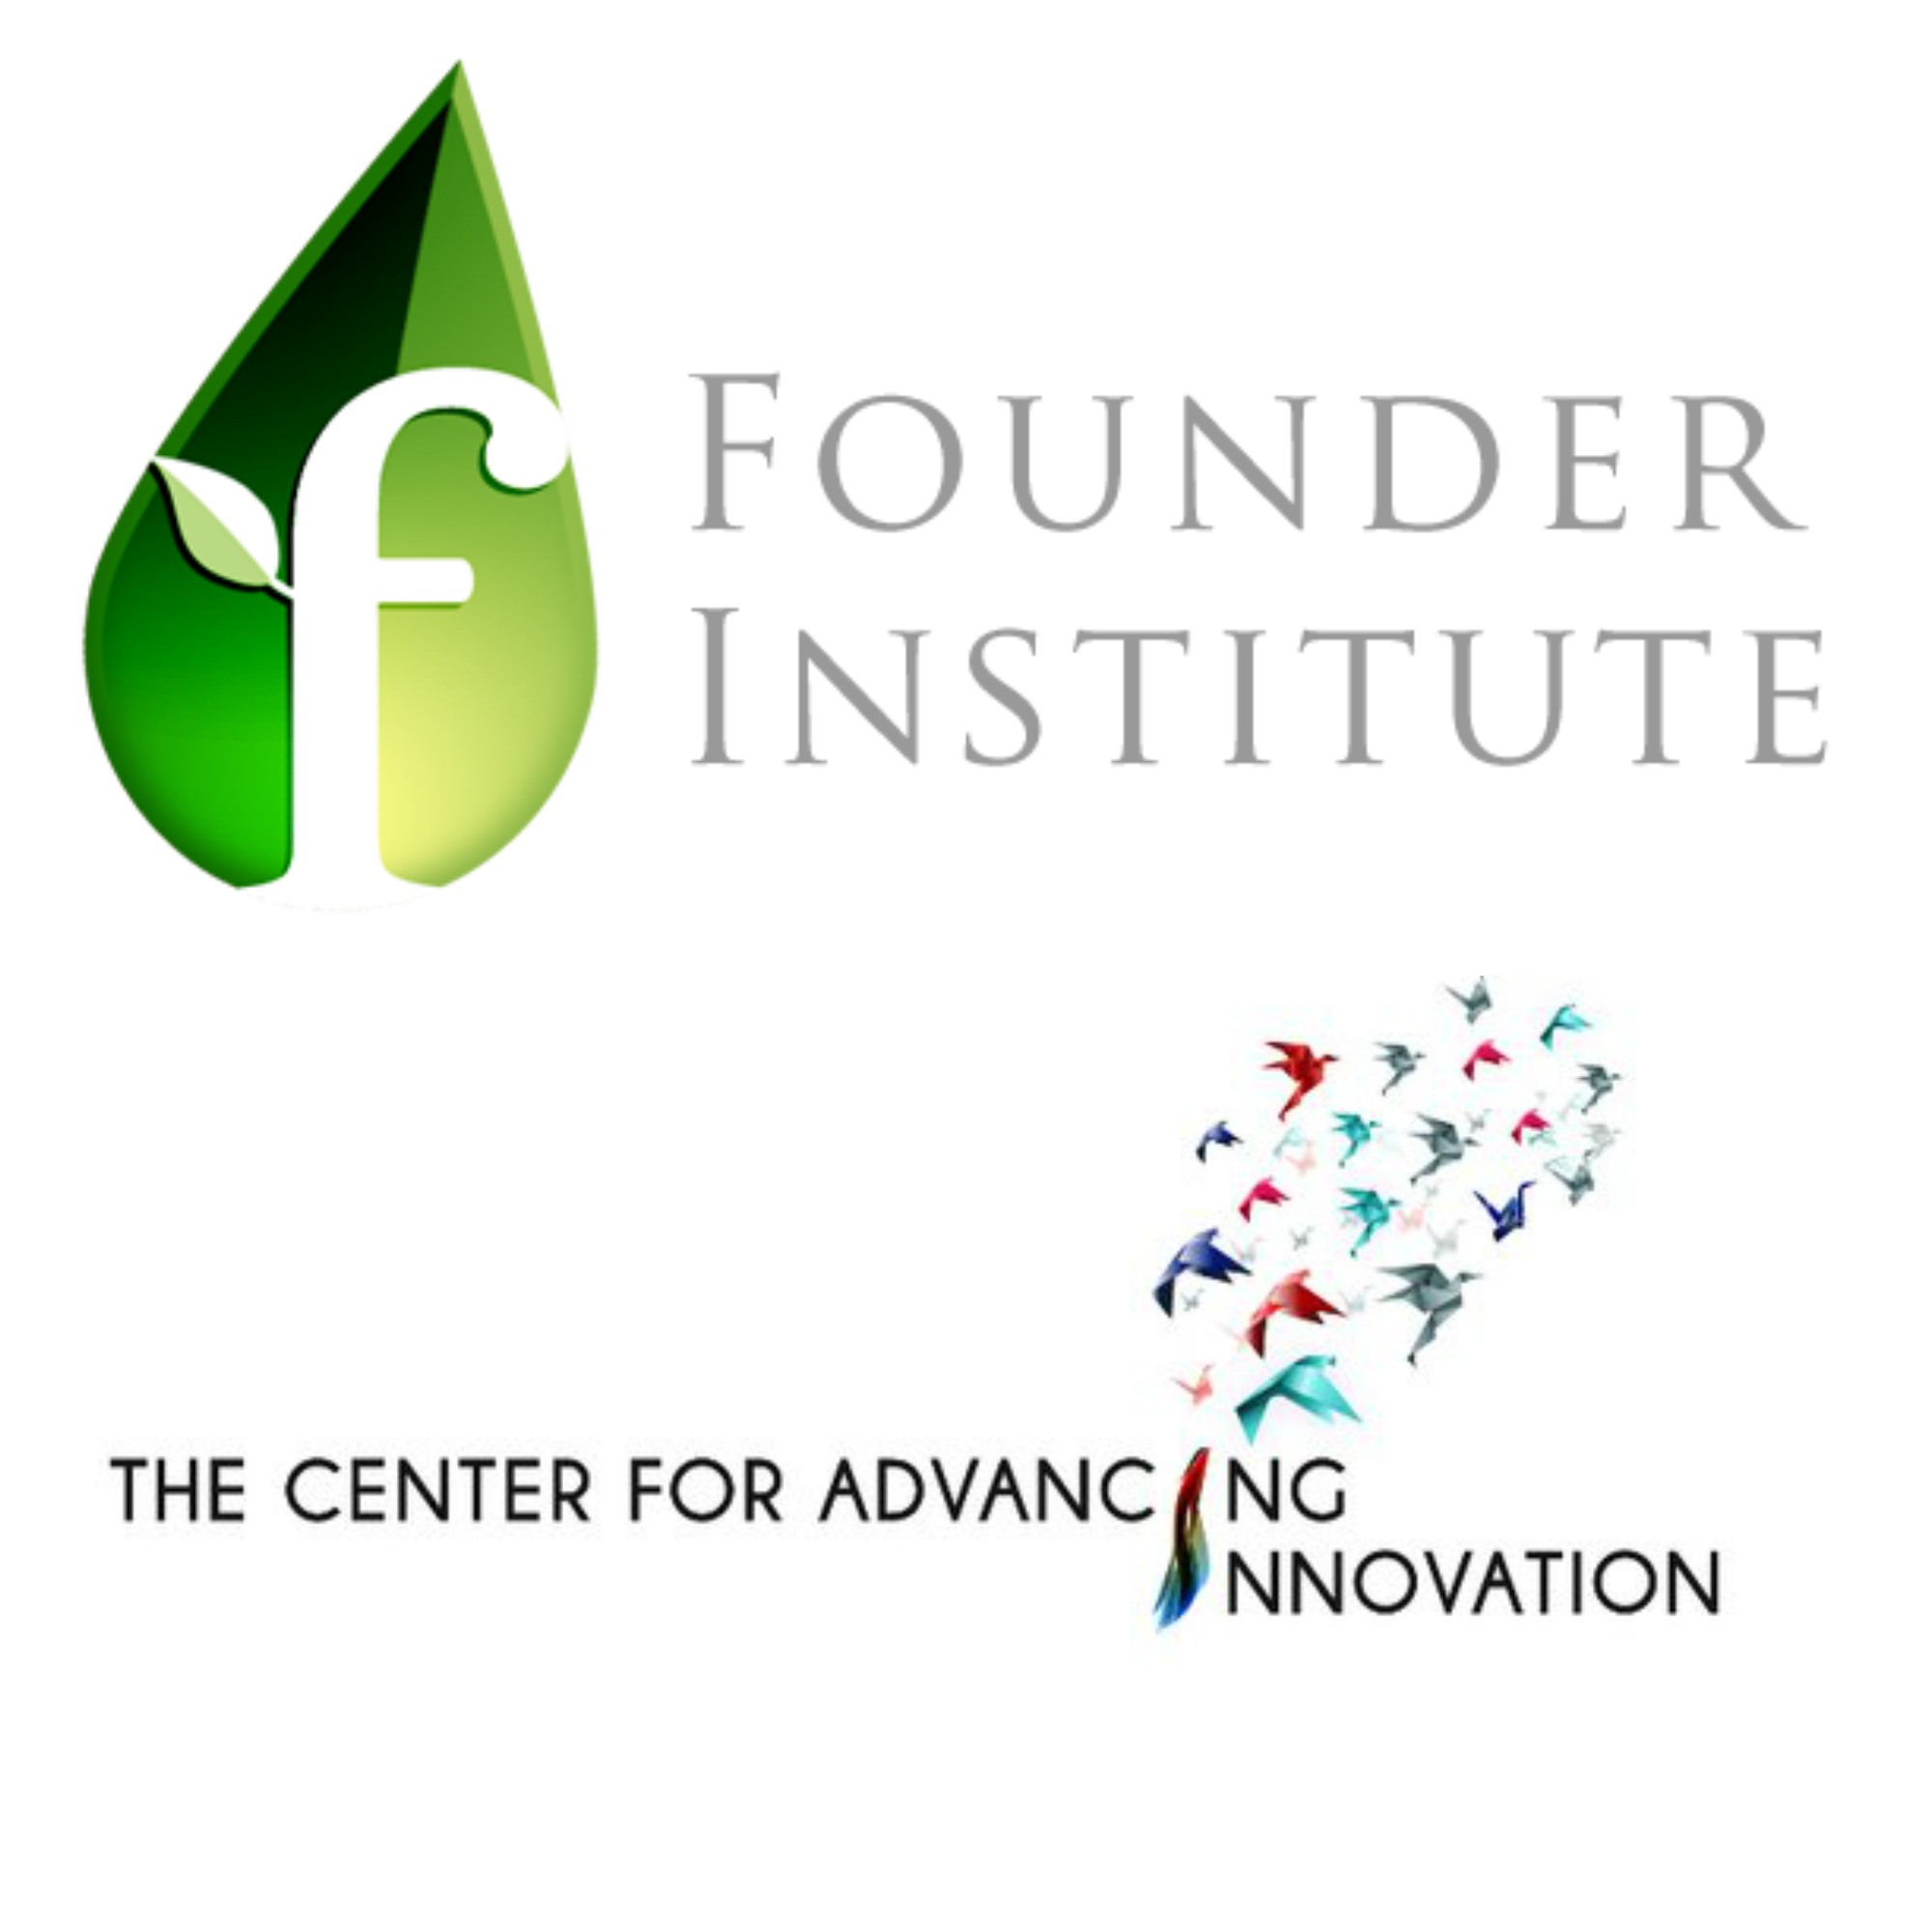 The Center for Advancing Innovation Partners with The Founder Institute